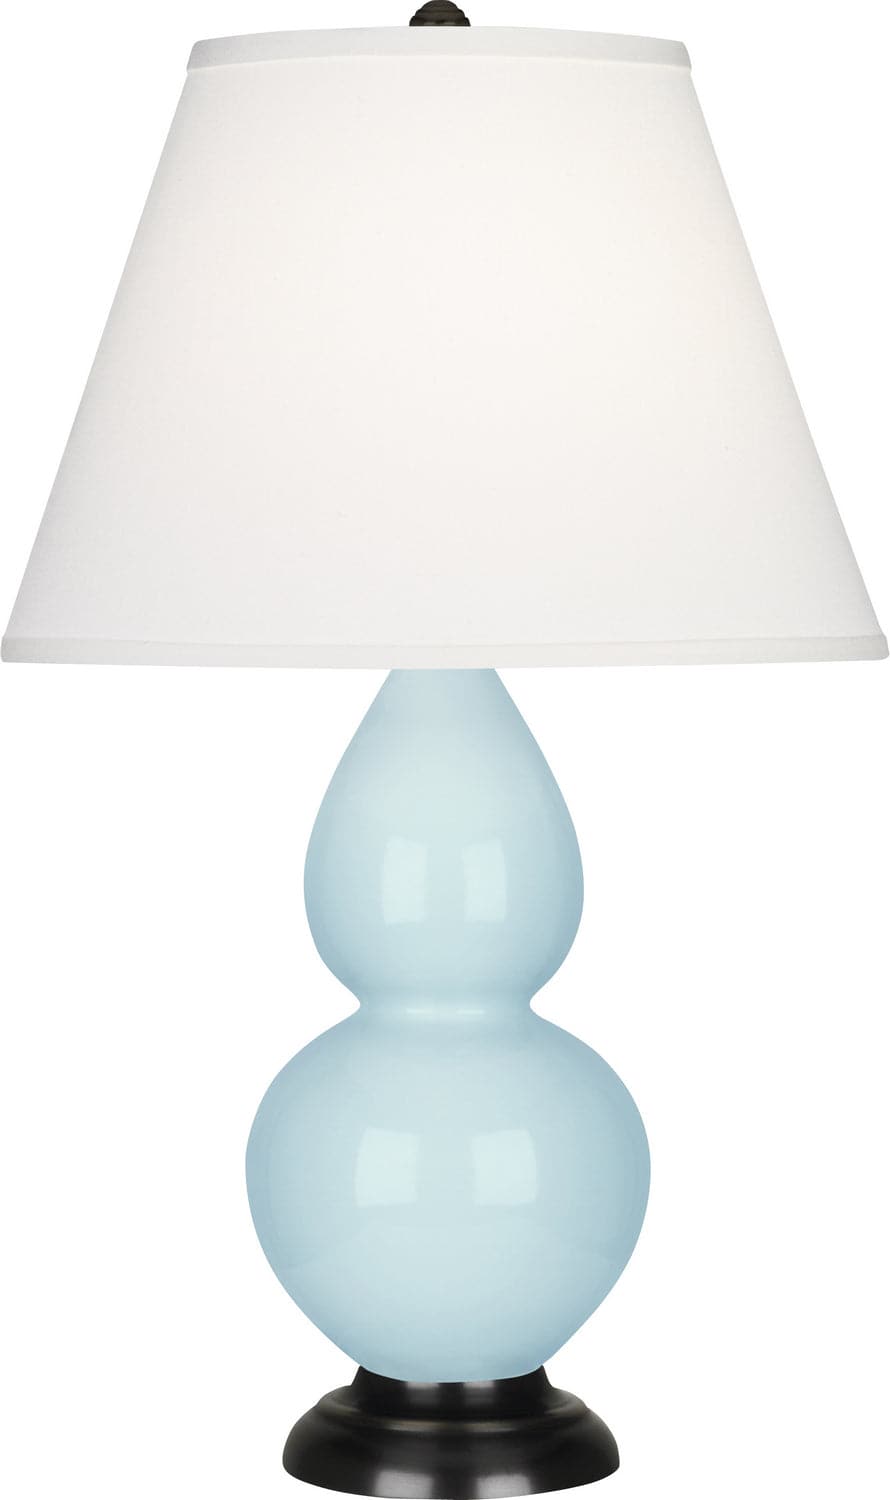 Robert Abbey - 1656X - One Light Accent Lamp - Small Double Gourd - Baby Blue Glazed w/Deep Patina Bronze